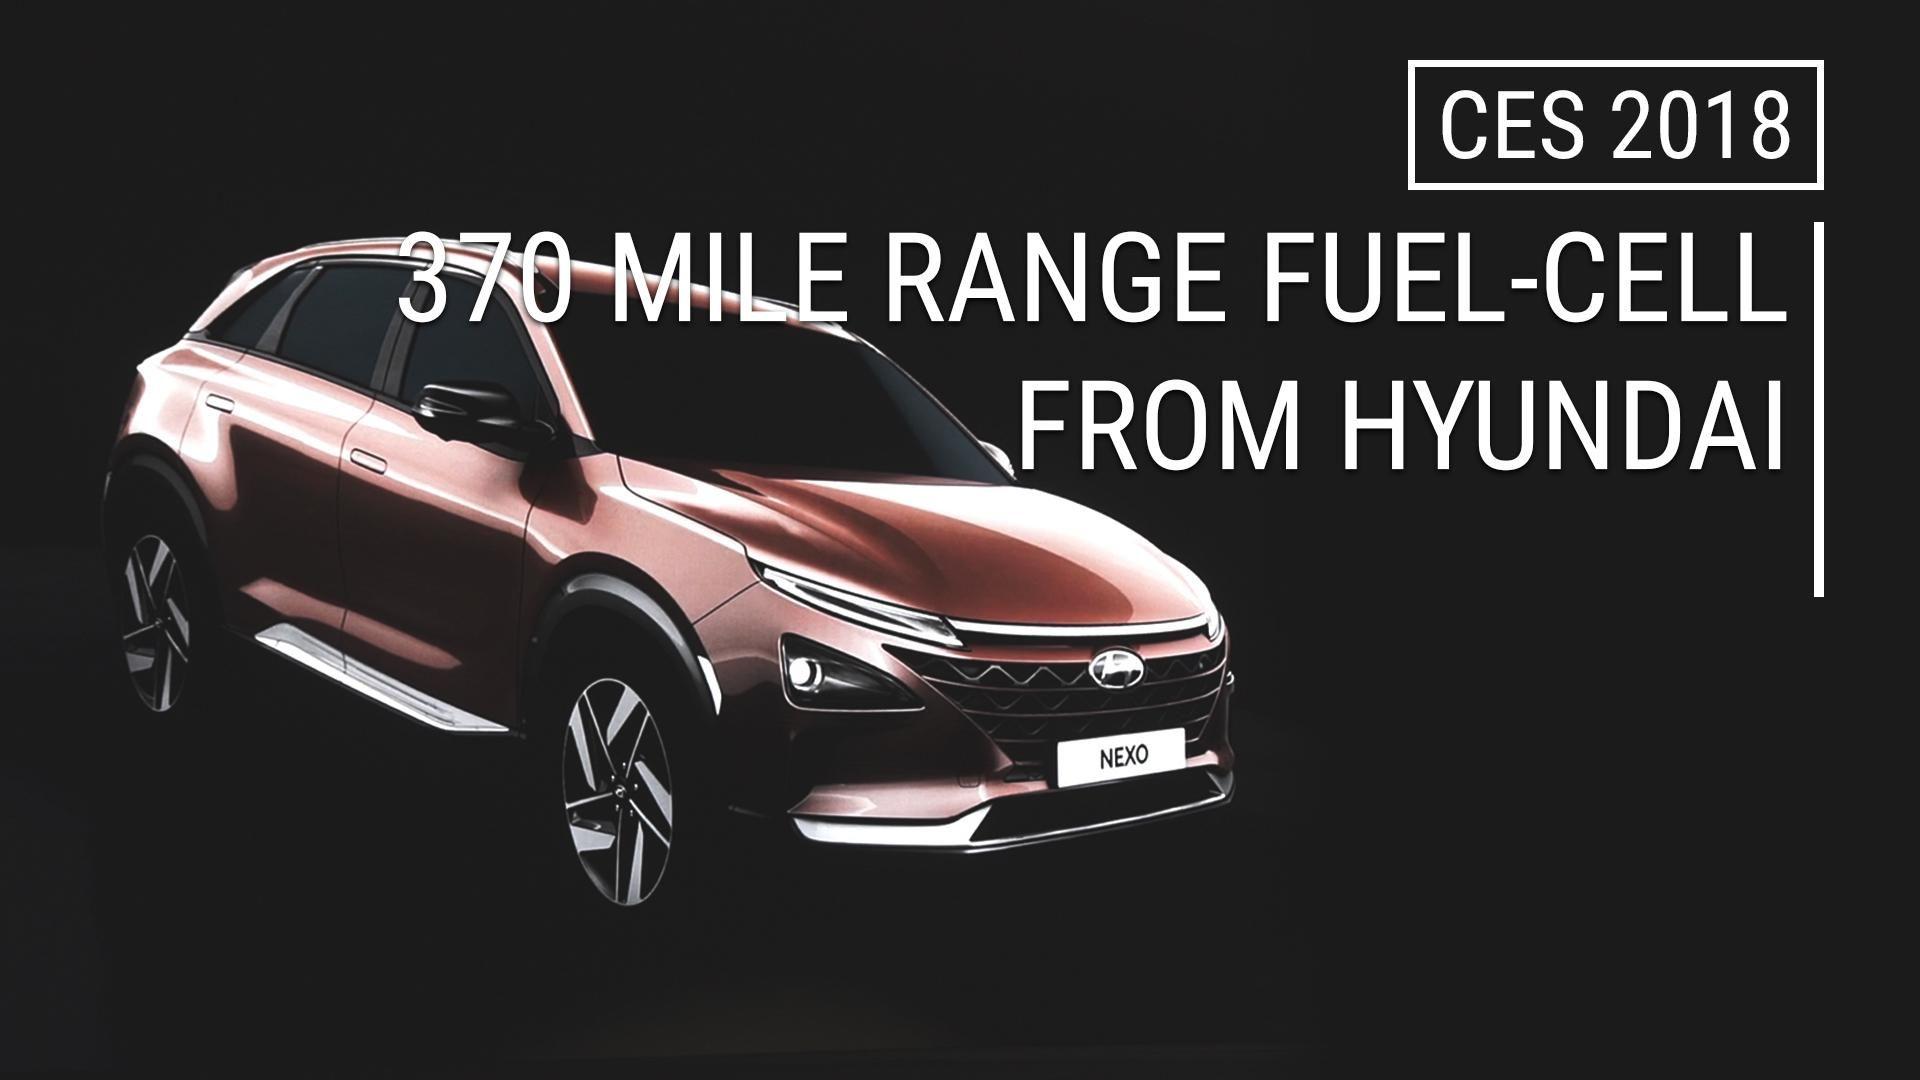 Hyundai Nexo is the name of automaker’s next hydrogen fuel